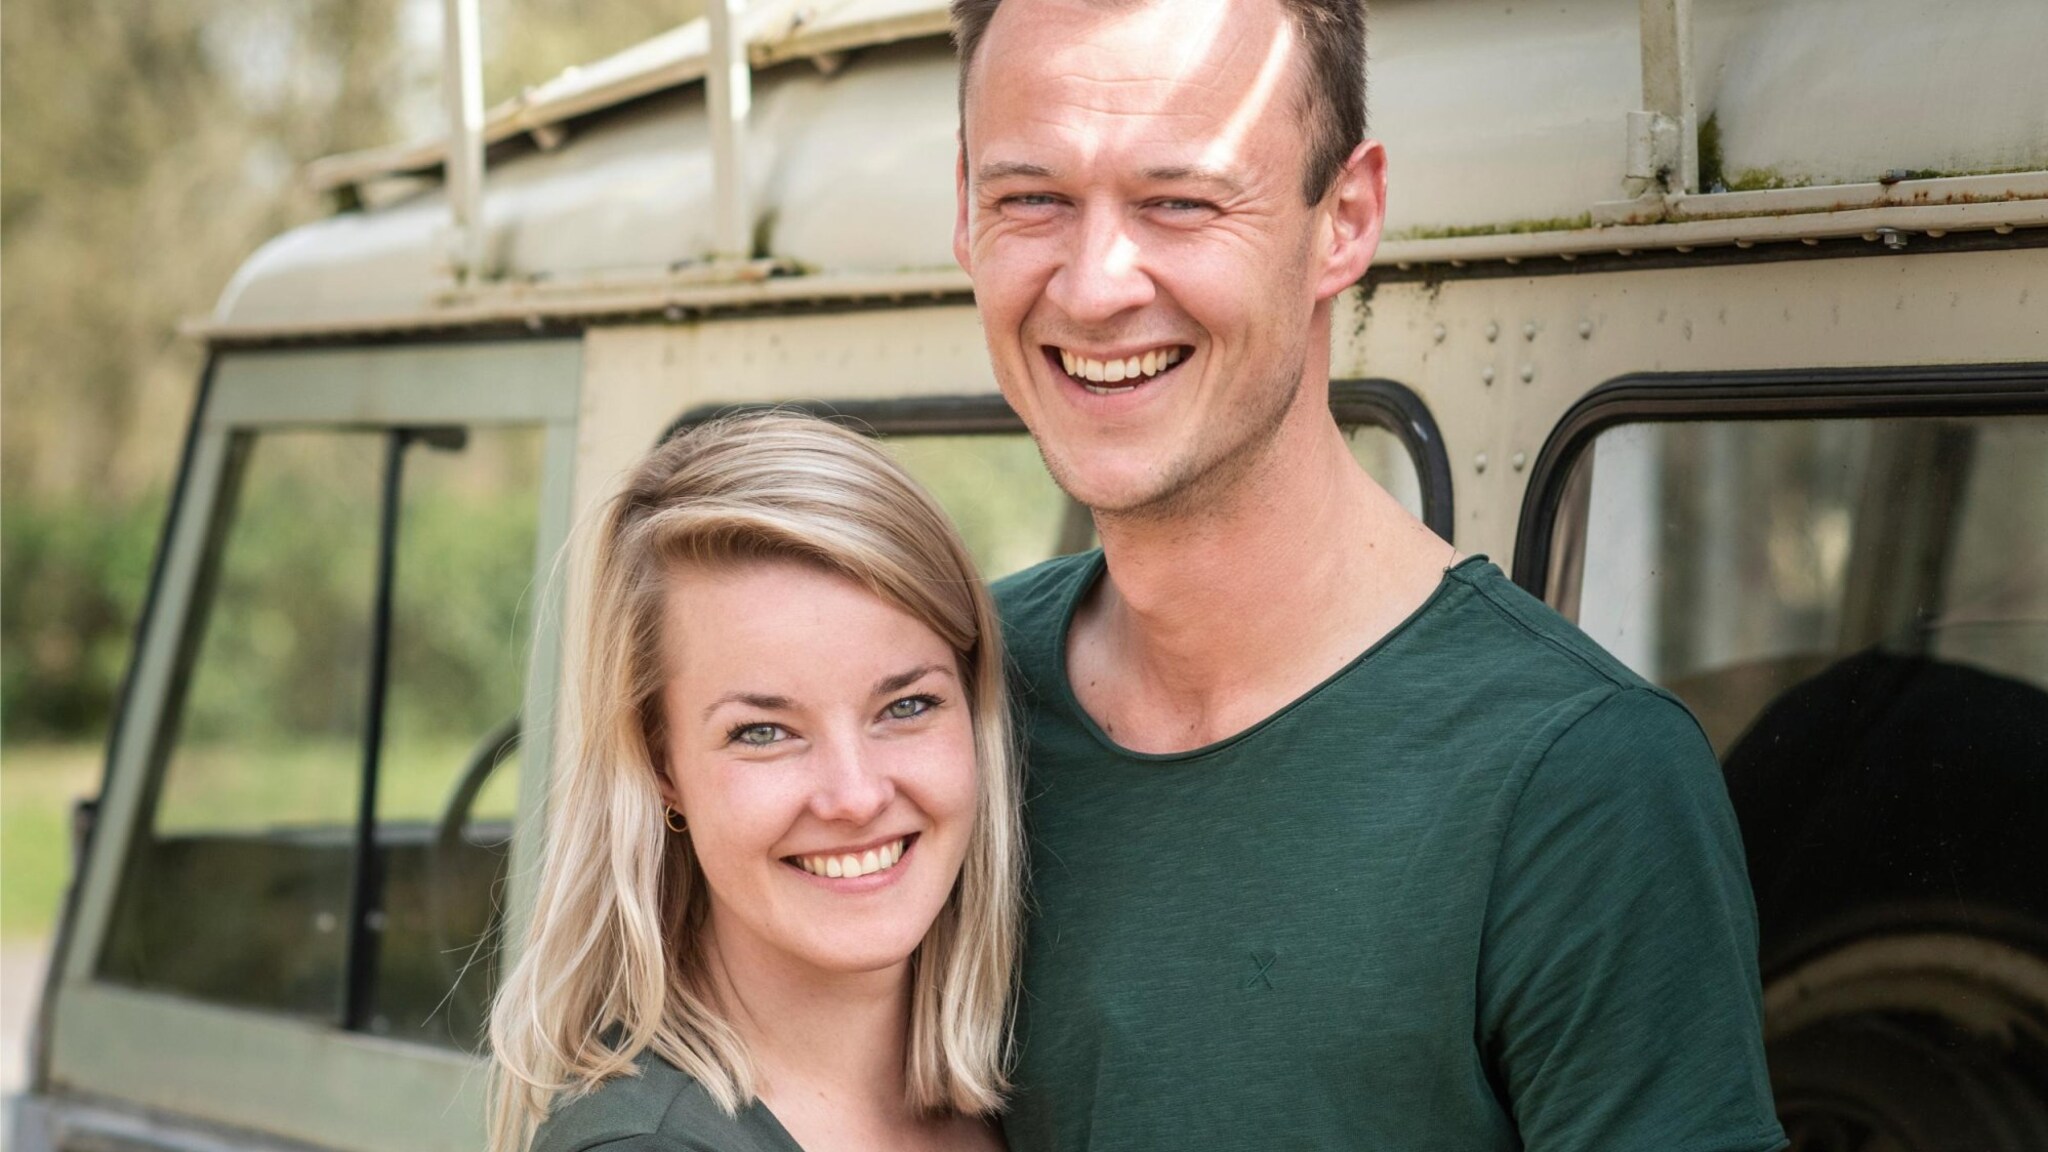 Boer cattle farmer Jouke and Karlijn are looking for a woman who gives a relationship update